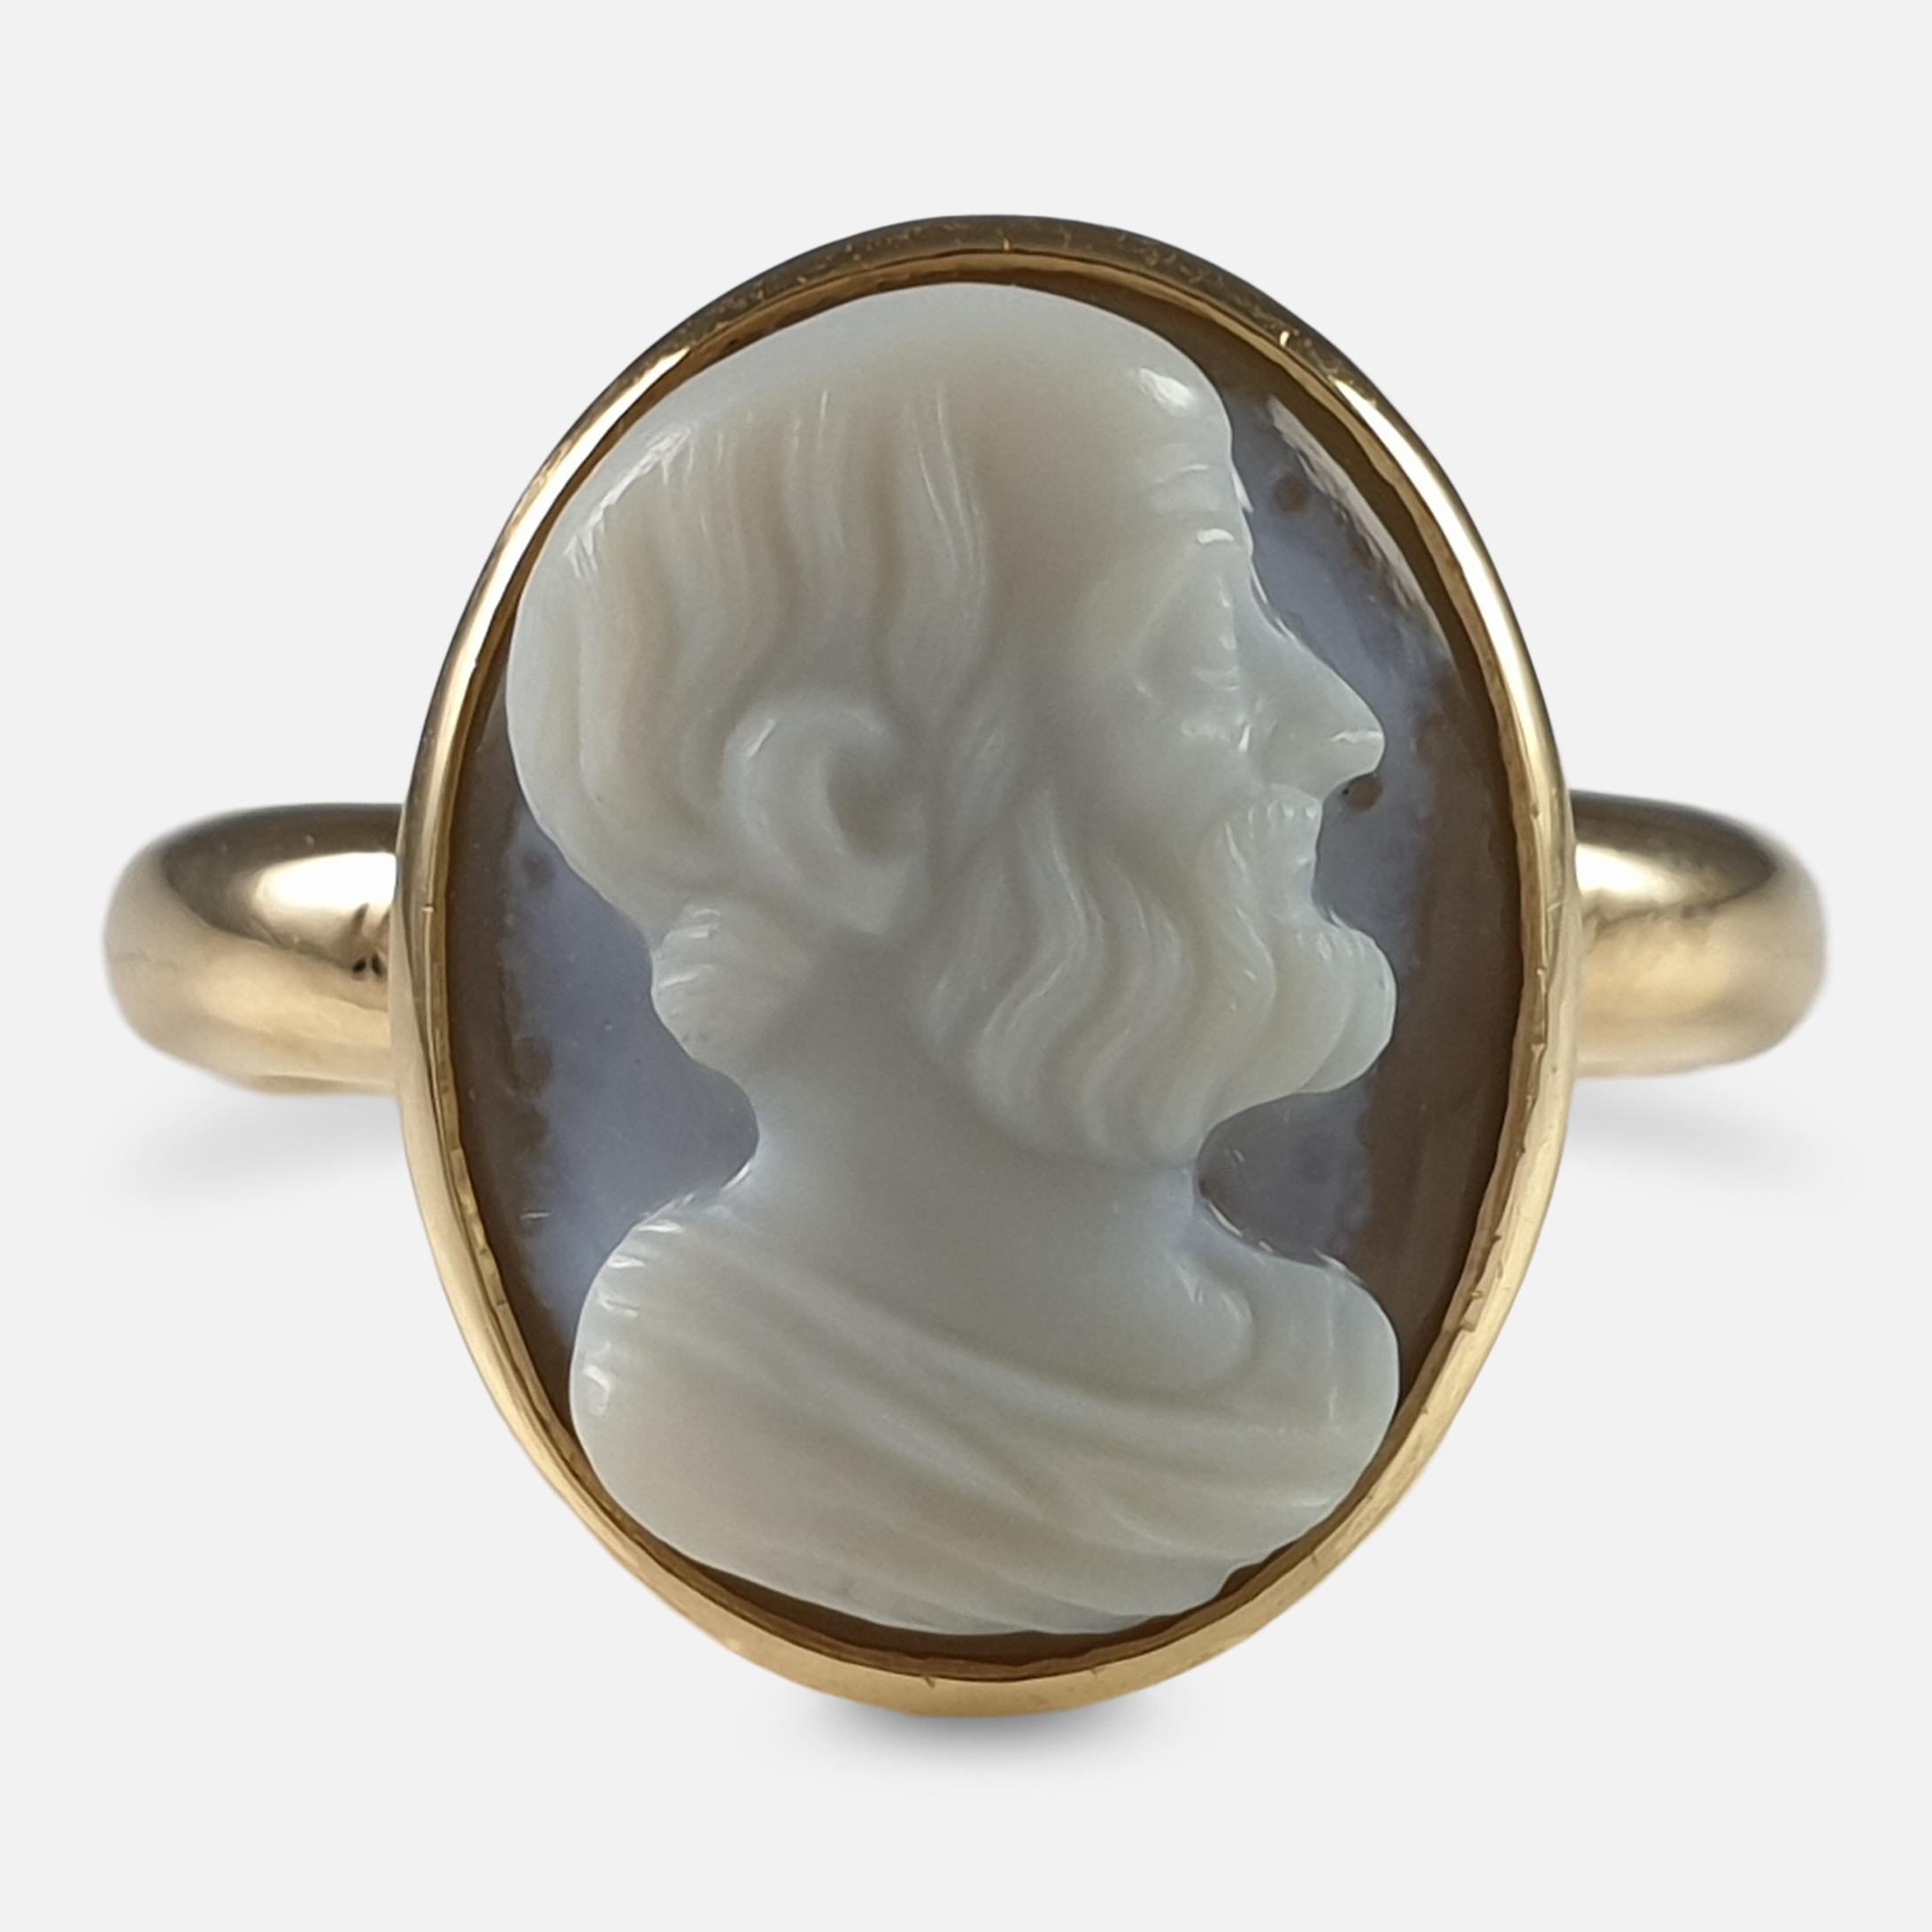 An 18ct yellow gold cameo ring. The 19th century sardonyx cameo, depicting a man with head in profile facing right, having short hair, aquiline nose, and a beard.

The cameo is rub over set with a closed back, on a later ring mount. The ring is